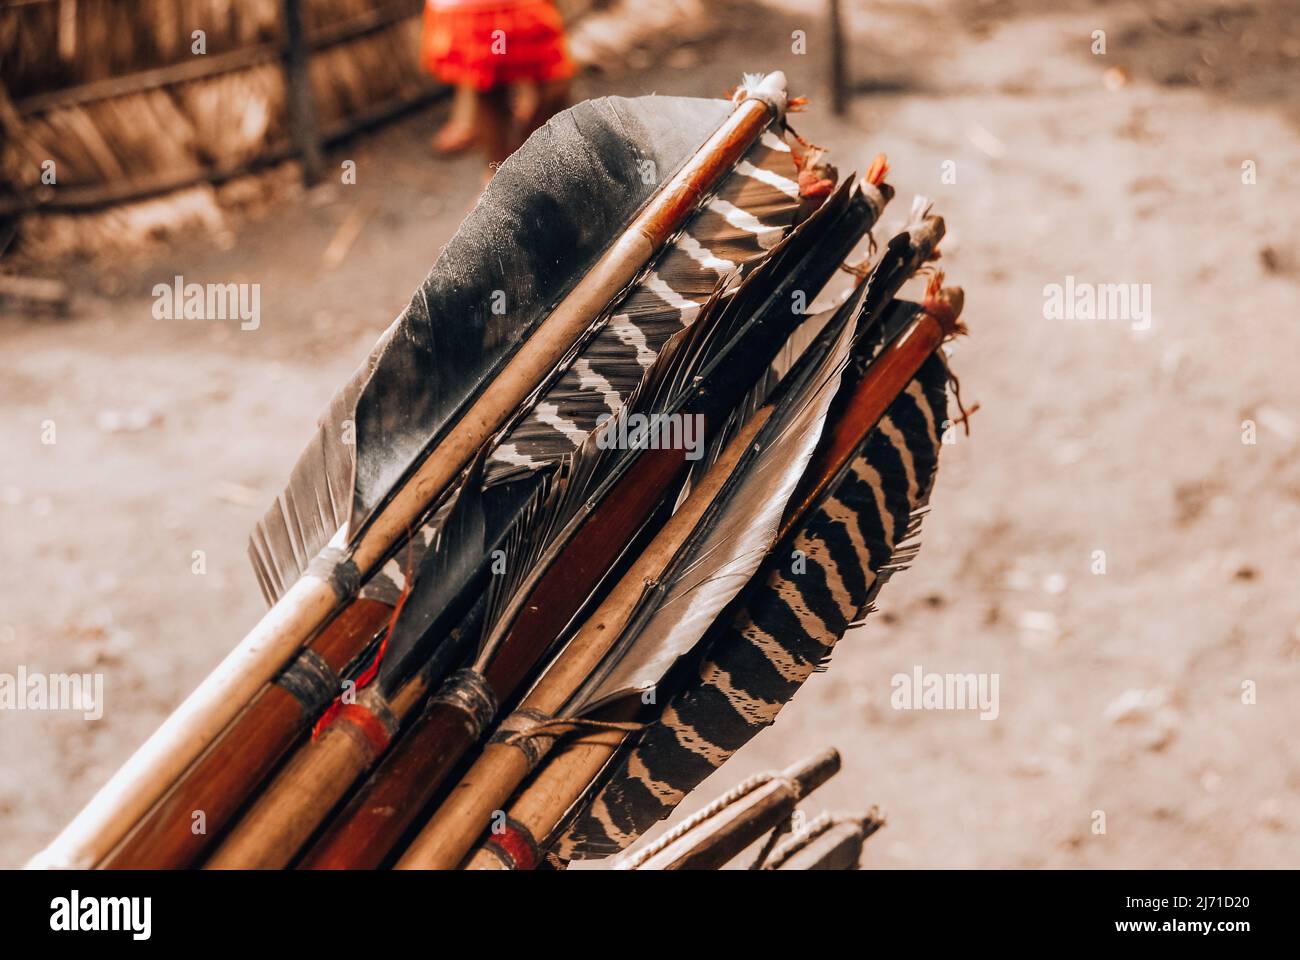 Hand made feathered indian arrows crafted by indians of the Arara tribe, Xingu River, Amazon, Brazil. Stock Photo